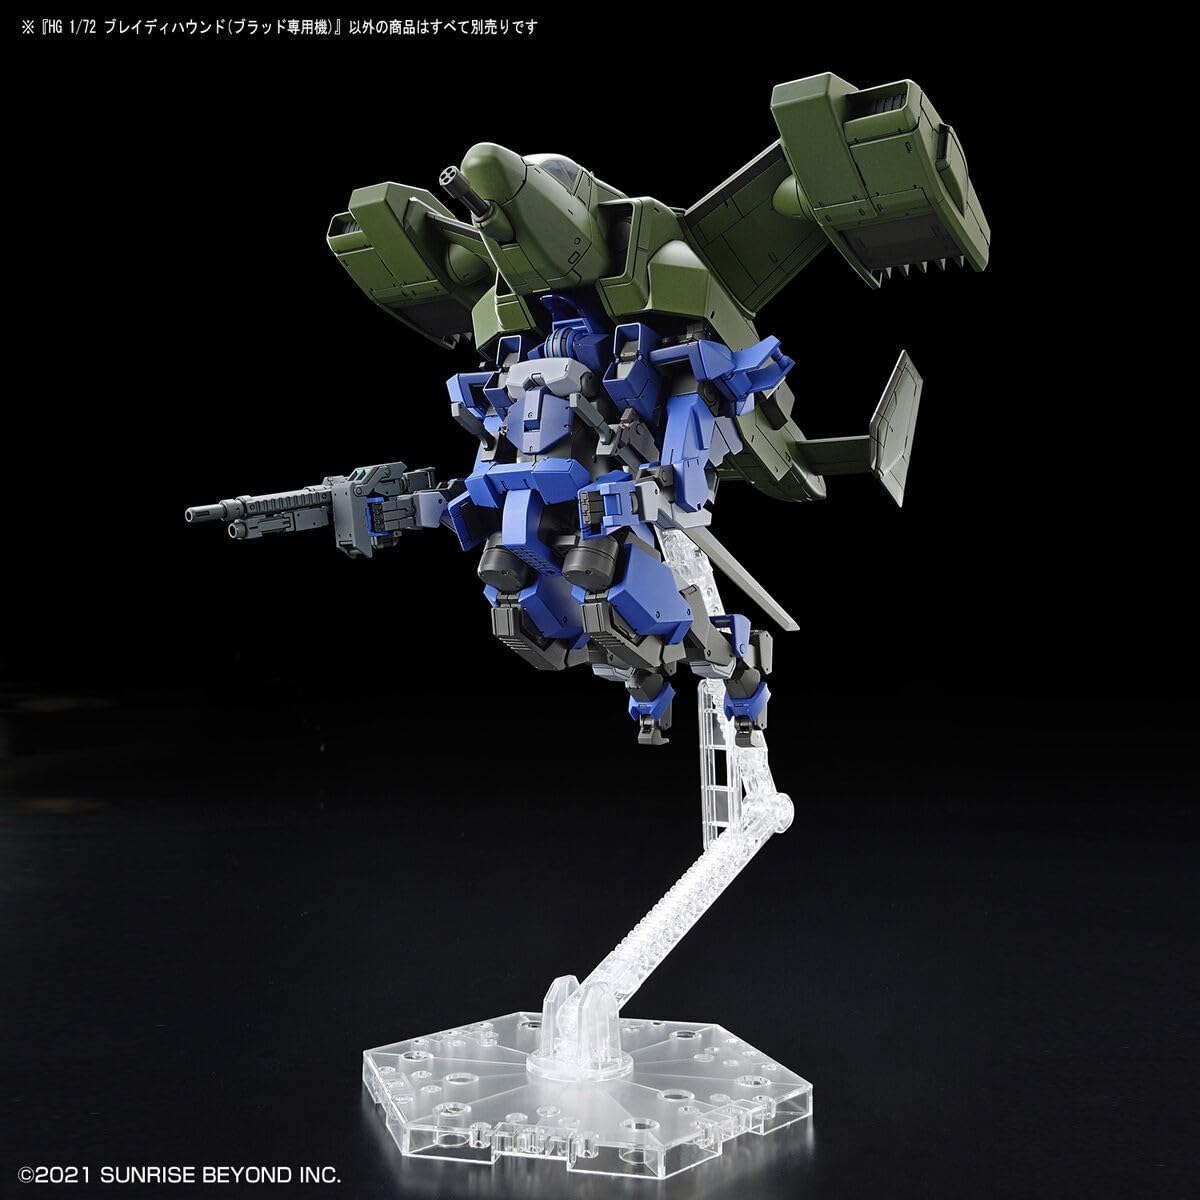 HG Boundary Battlers Brady Hound (Blood Device) 1/72 Scale Color-Coded Plastic Model